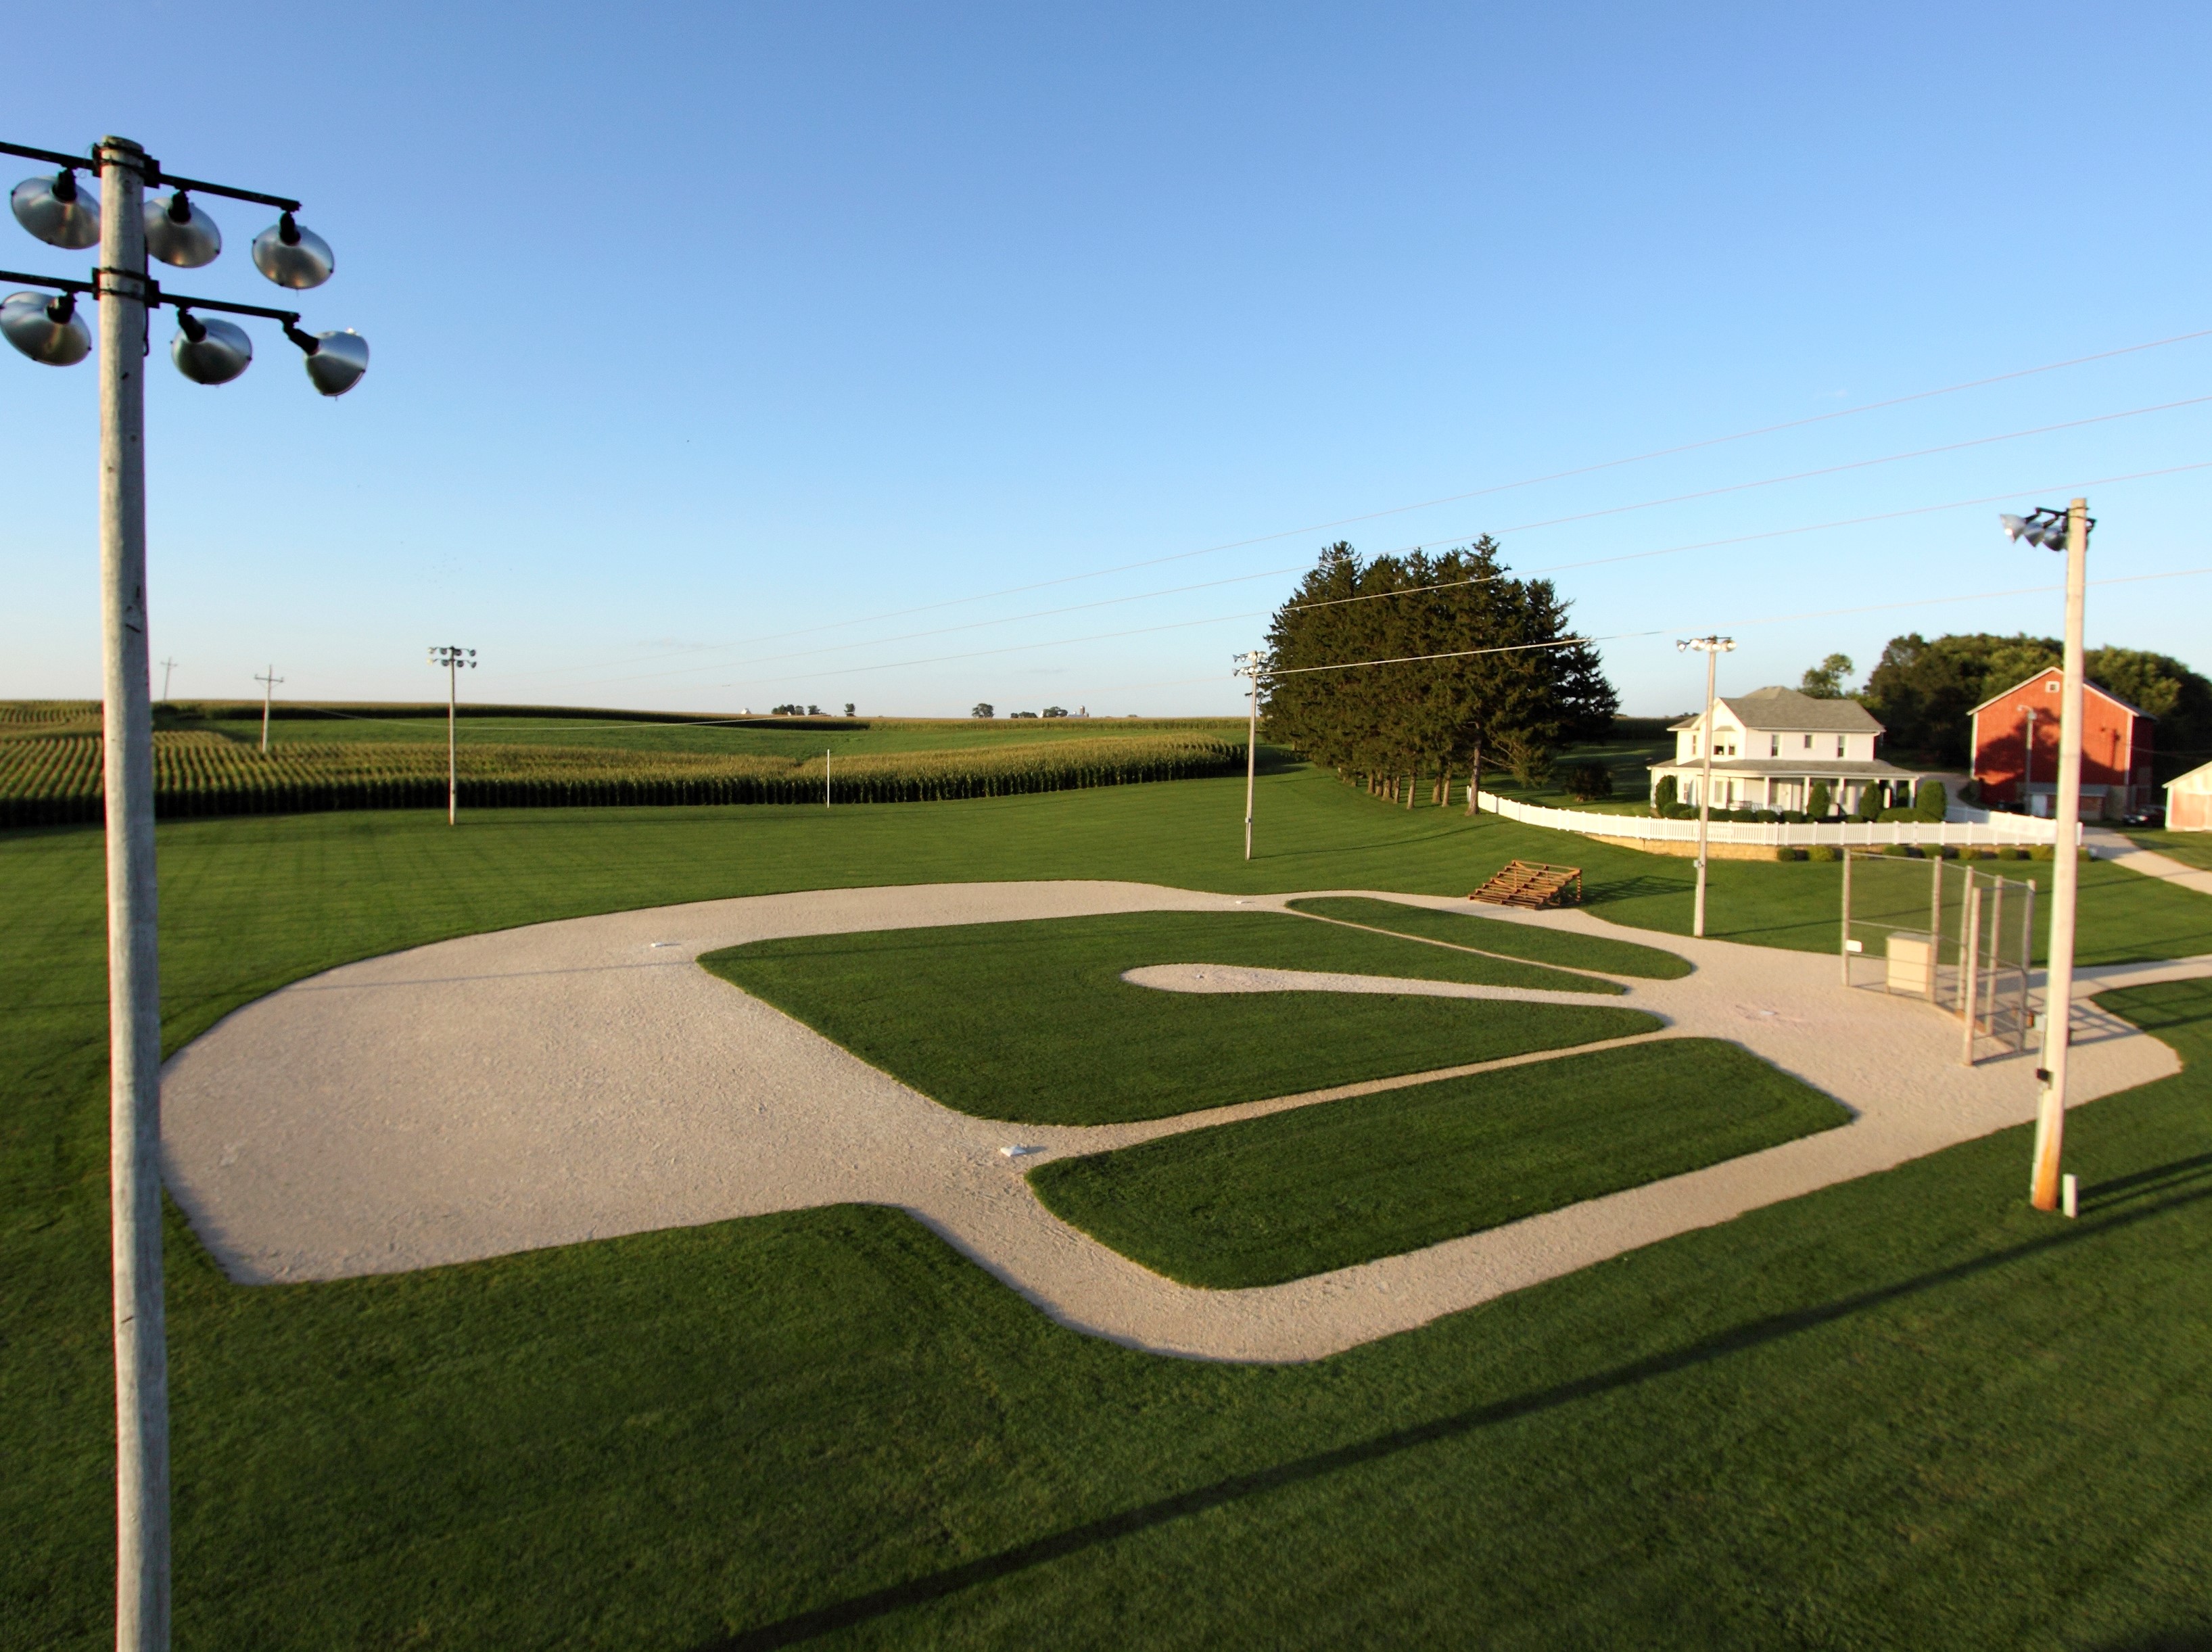 Open 365 days a year, it's the site of the largest pick-up baseball game in the world